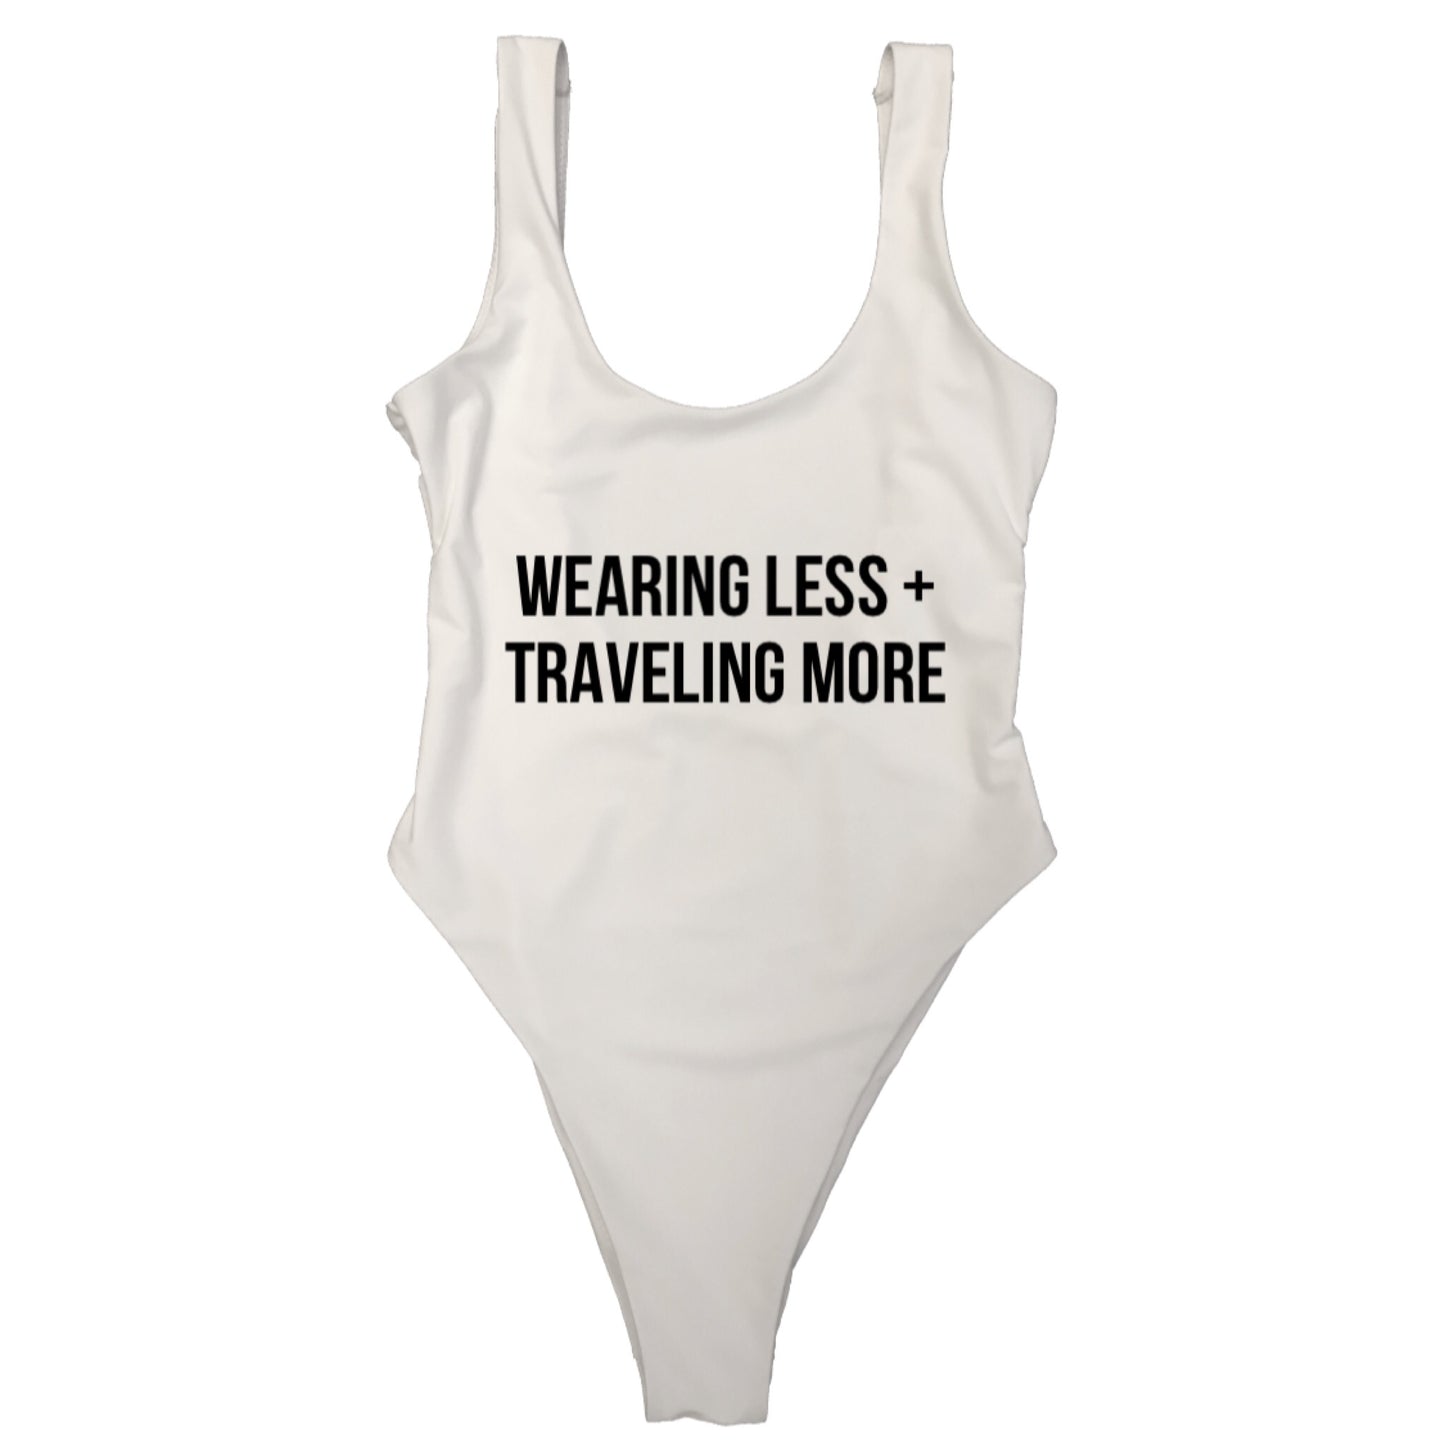 WEARING LESS + TRAVELING MORE